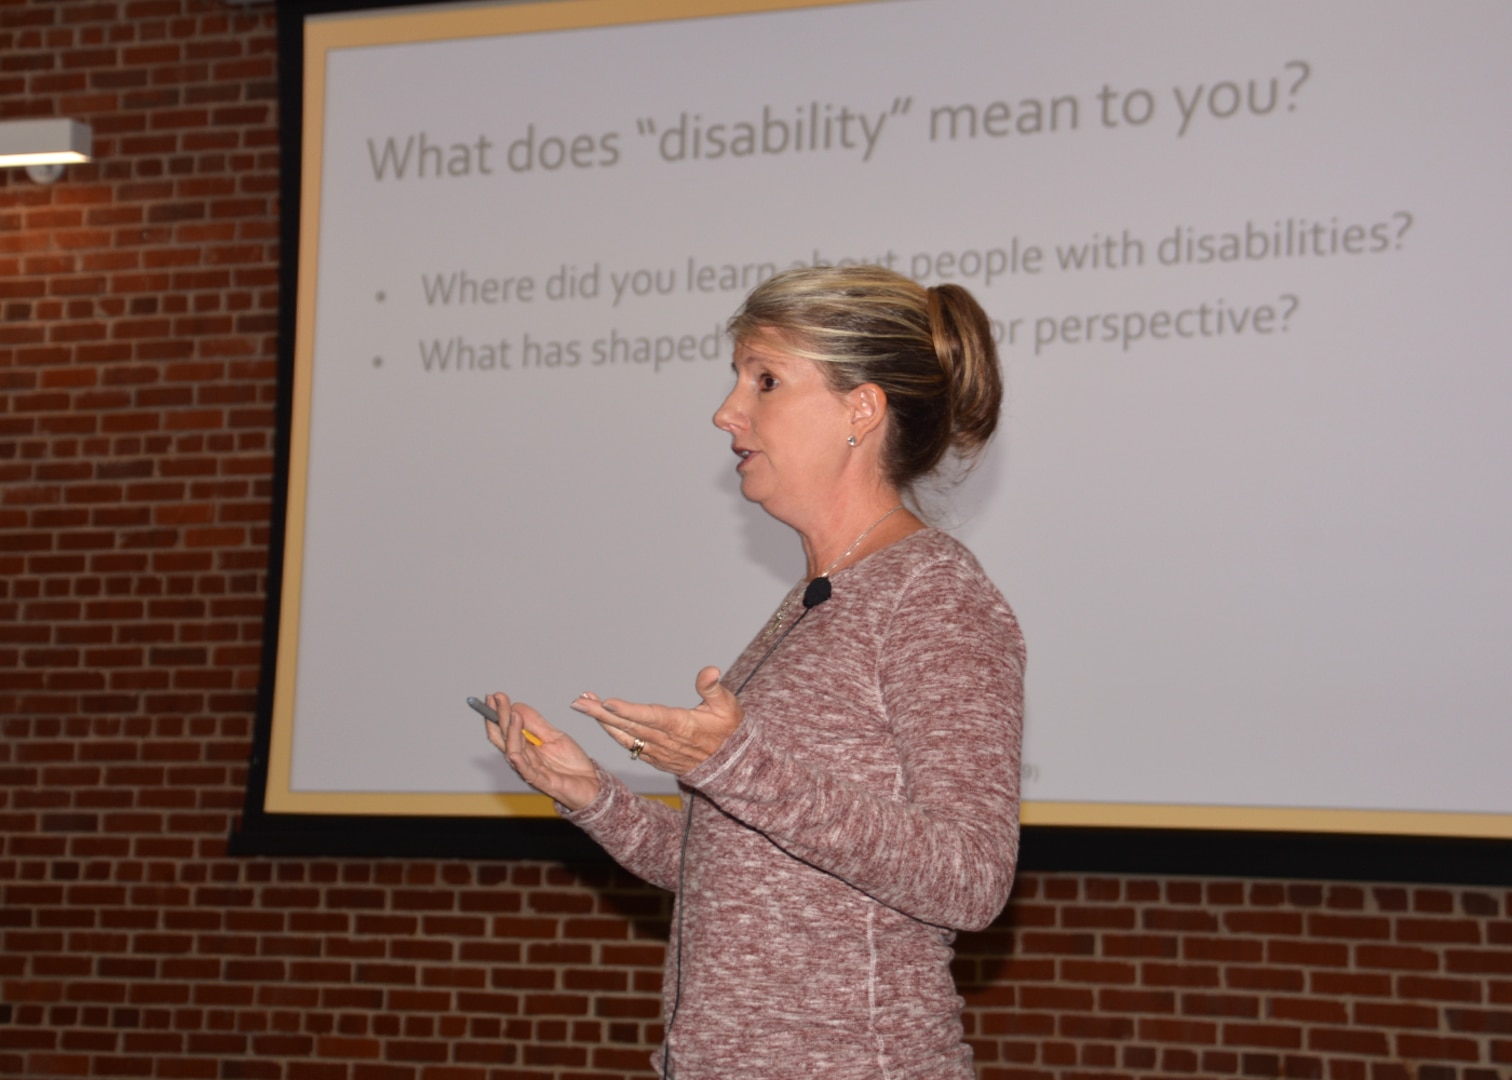 Finding ability beyond disabilities in the workforce